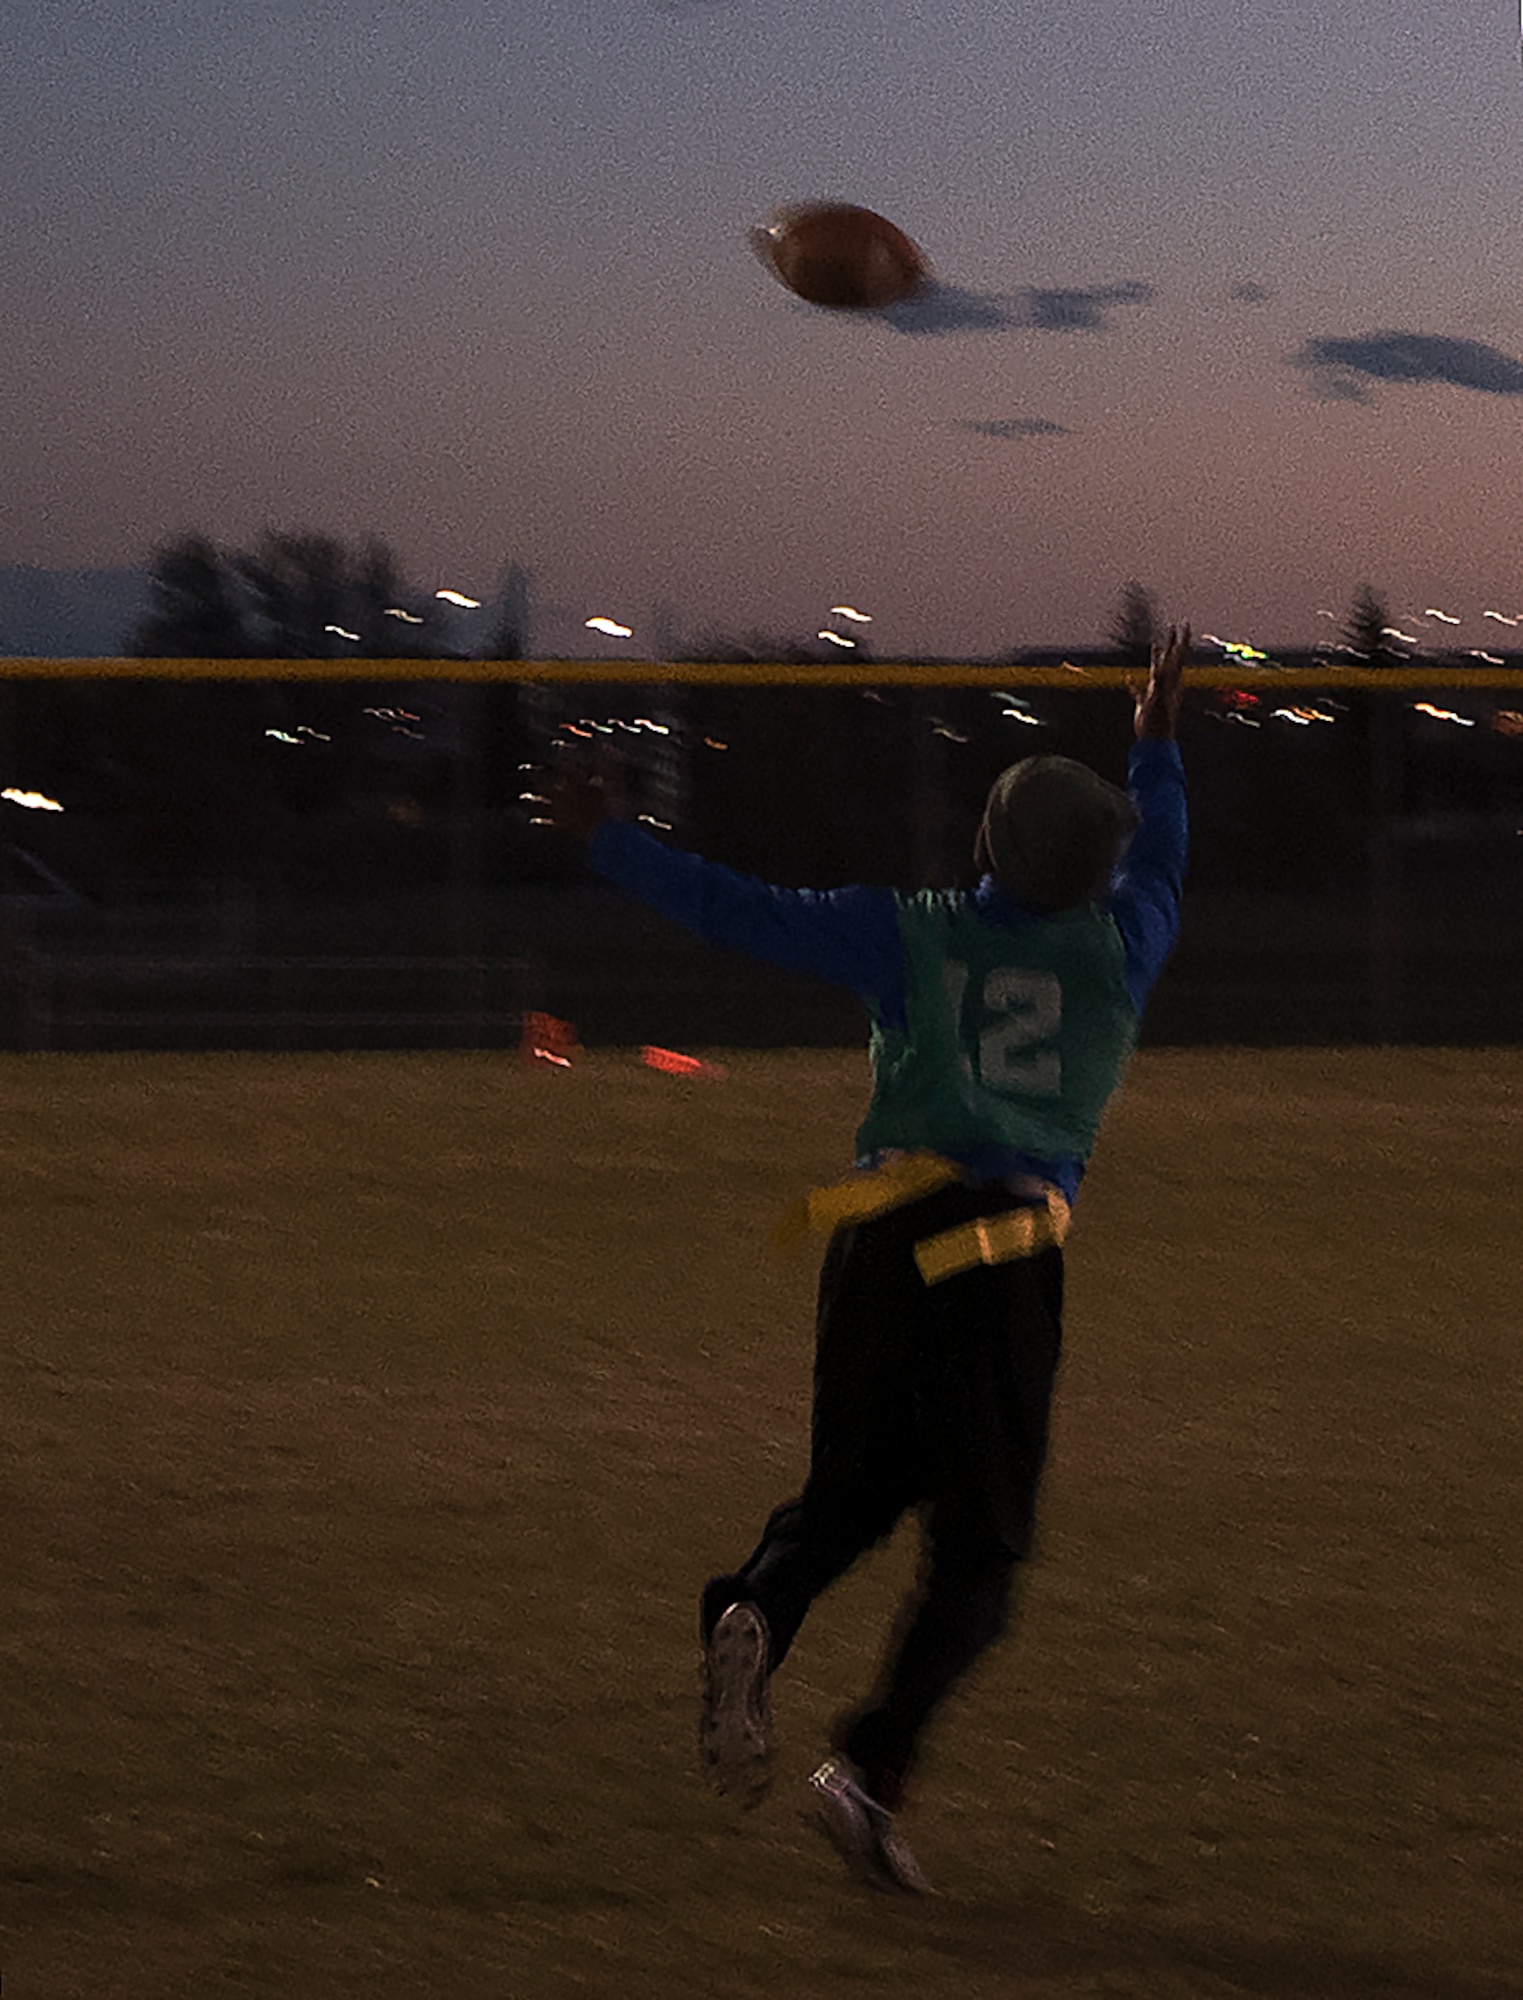 Troy Stuckey, 90th Maintenance Group and 20th Air Force intramural flag football team member, reaches out to catch a pass during the championship game at F.E. Warren Air Force Base, Wyo., Oct. 19, 2016. The 90th MXG/20th AF team beat the 790th Missile Security Forces Squadron Tactical Response Force team 14-6. (U.S. Air Force photo by Senior Airman Brandon Valle)